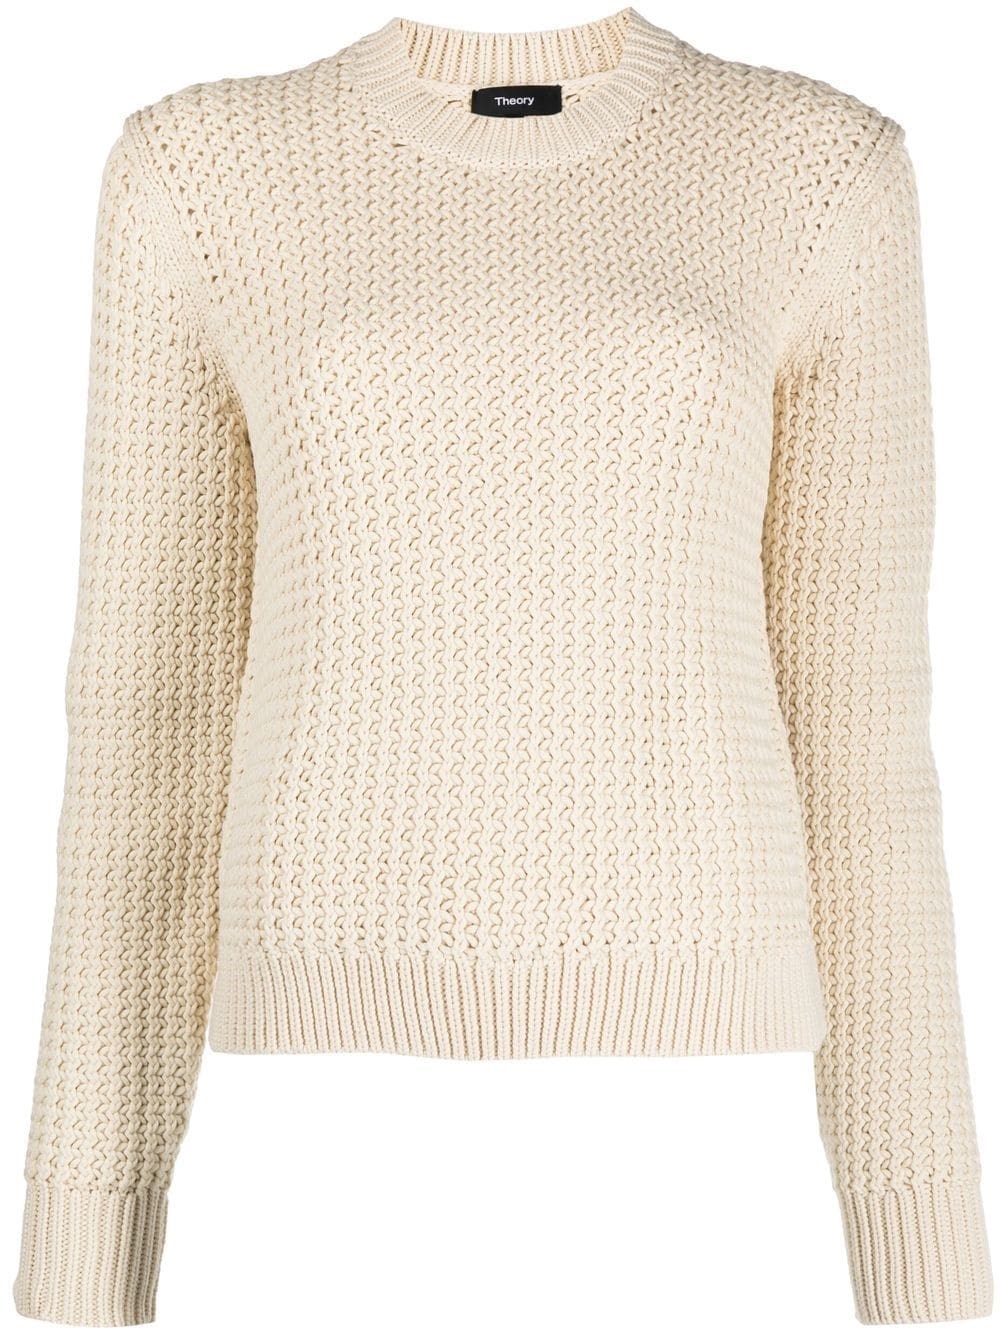 Theory Rickrack Ribbed Cotton Blend Sweater In Beige | ModeSens